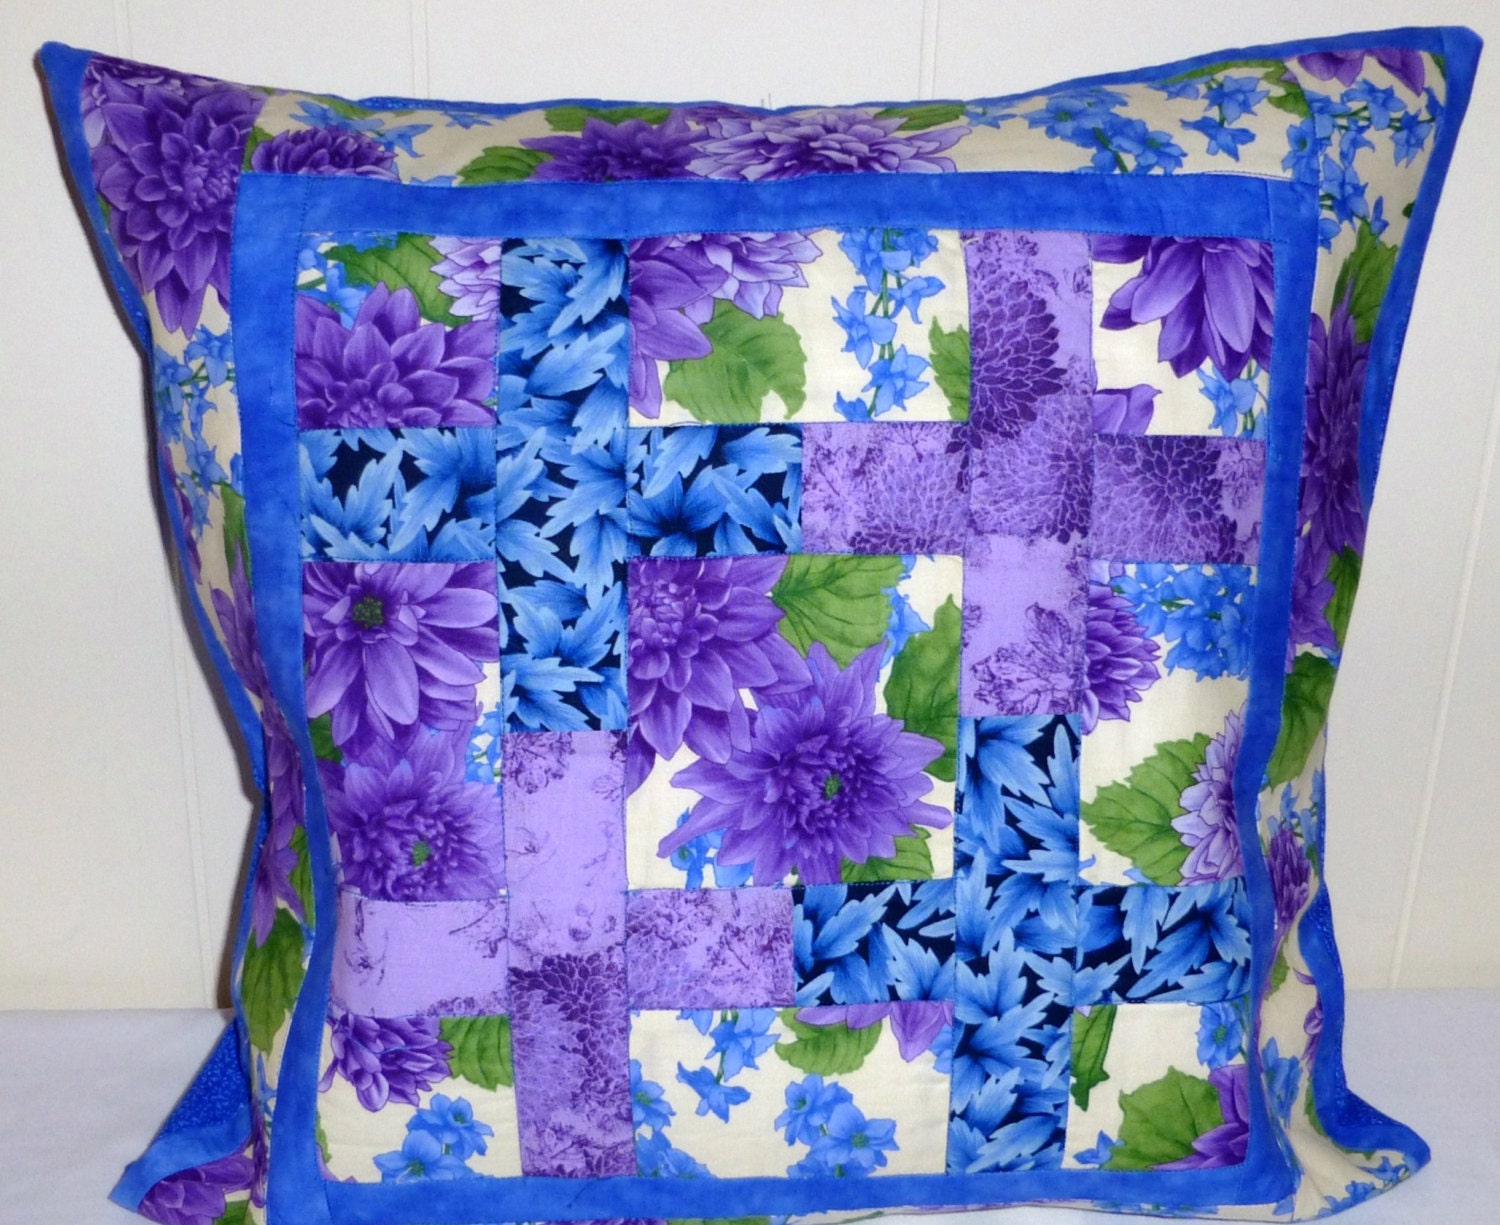 Quilted Pillow Patchwork 18inSquare PurpleFlowers Blue HomeAccent - SuesCreatingCottage